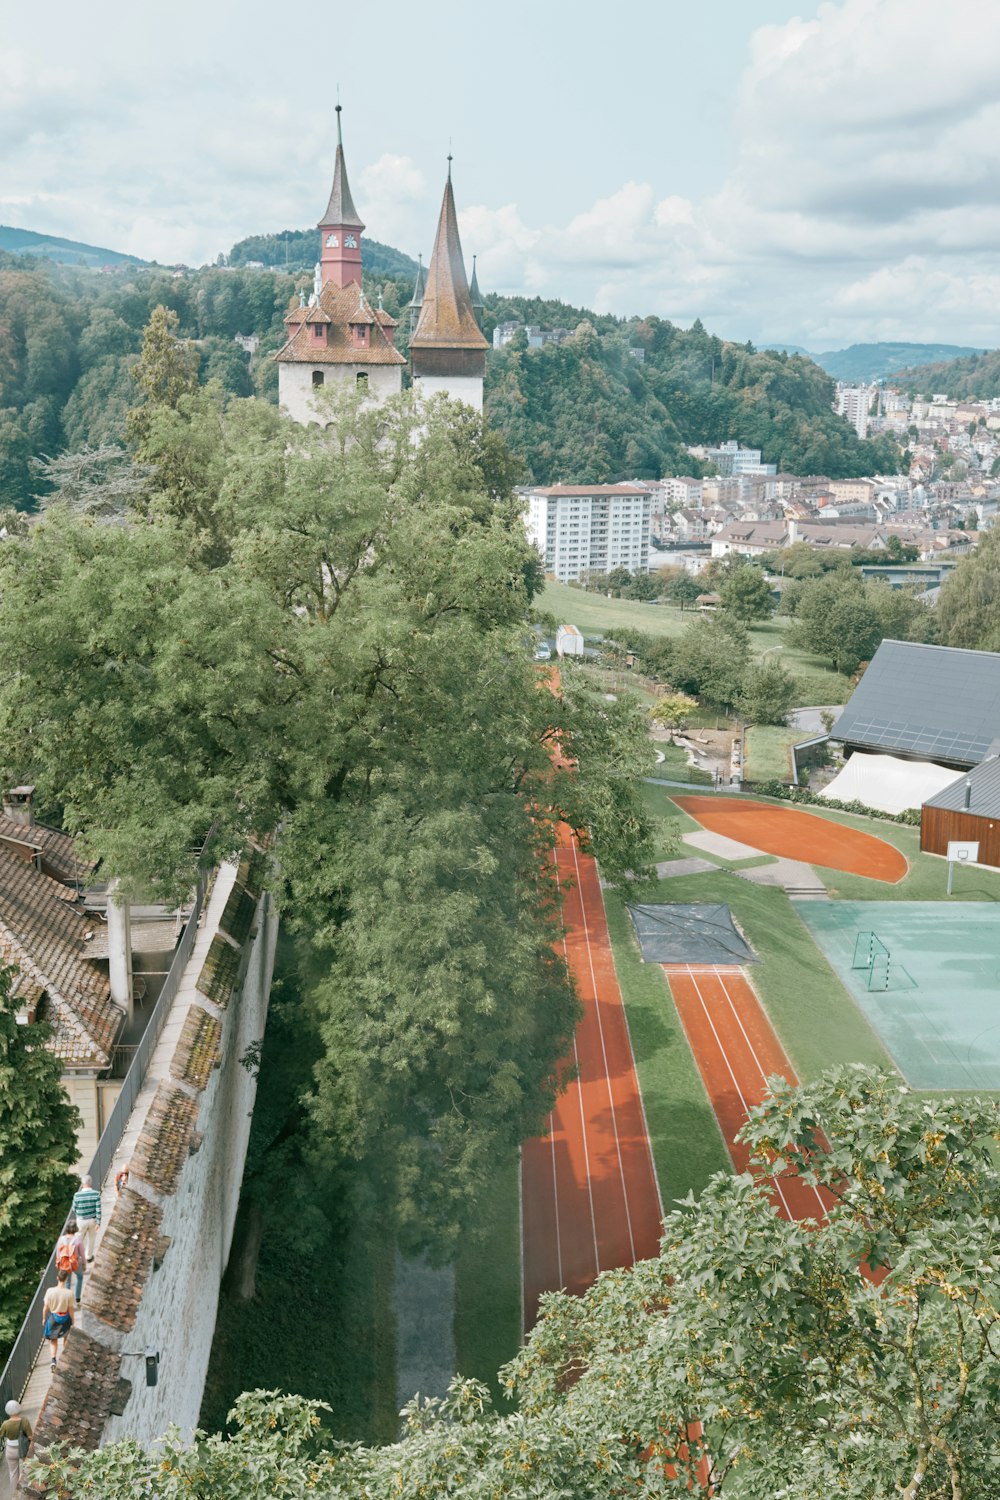 a view of a tennis court from a high point of view